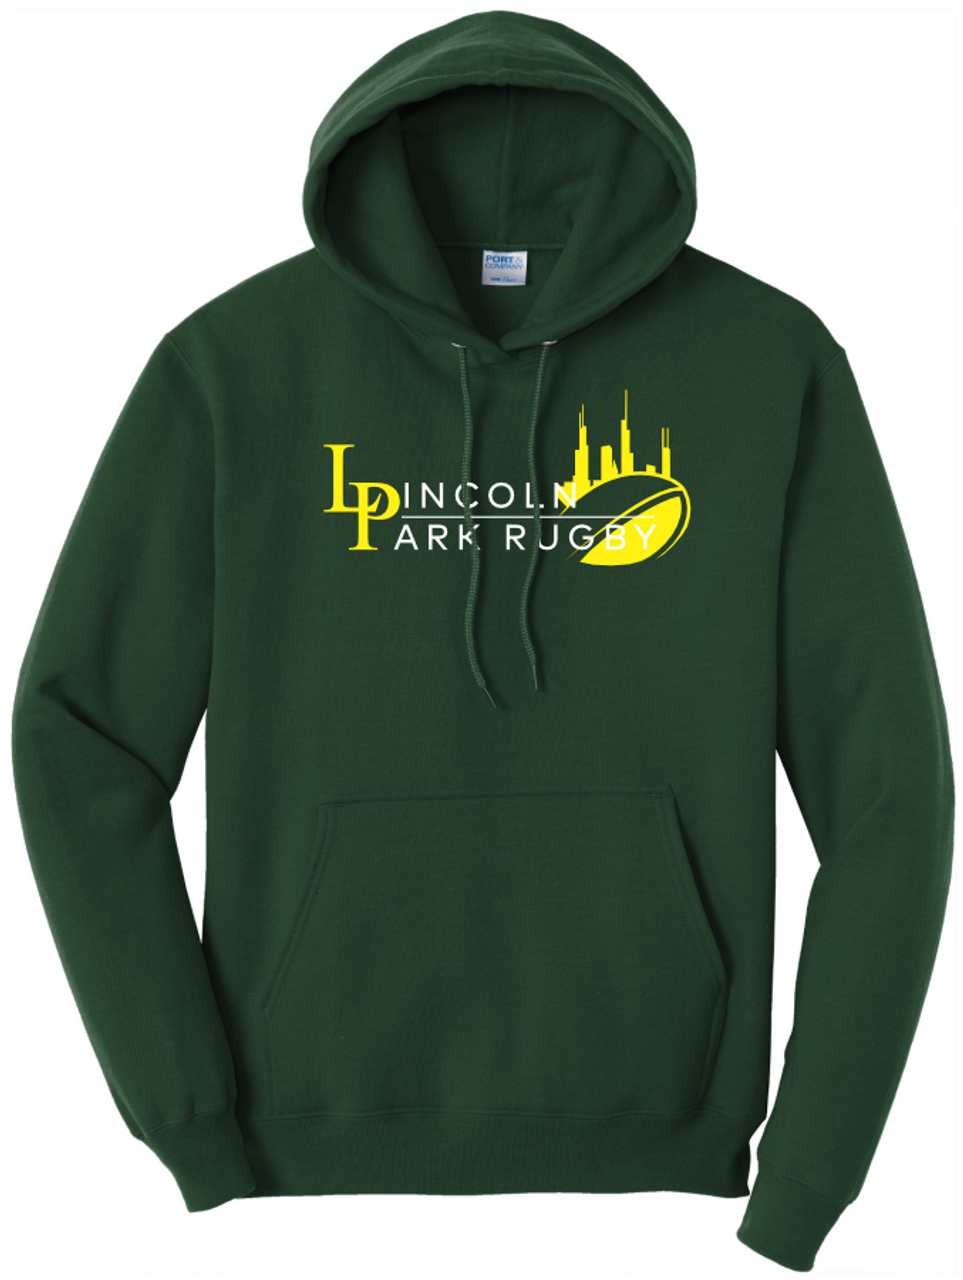 Lincoln Park RFC Hoodie, Forest Green